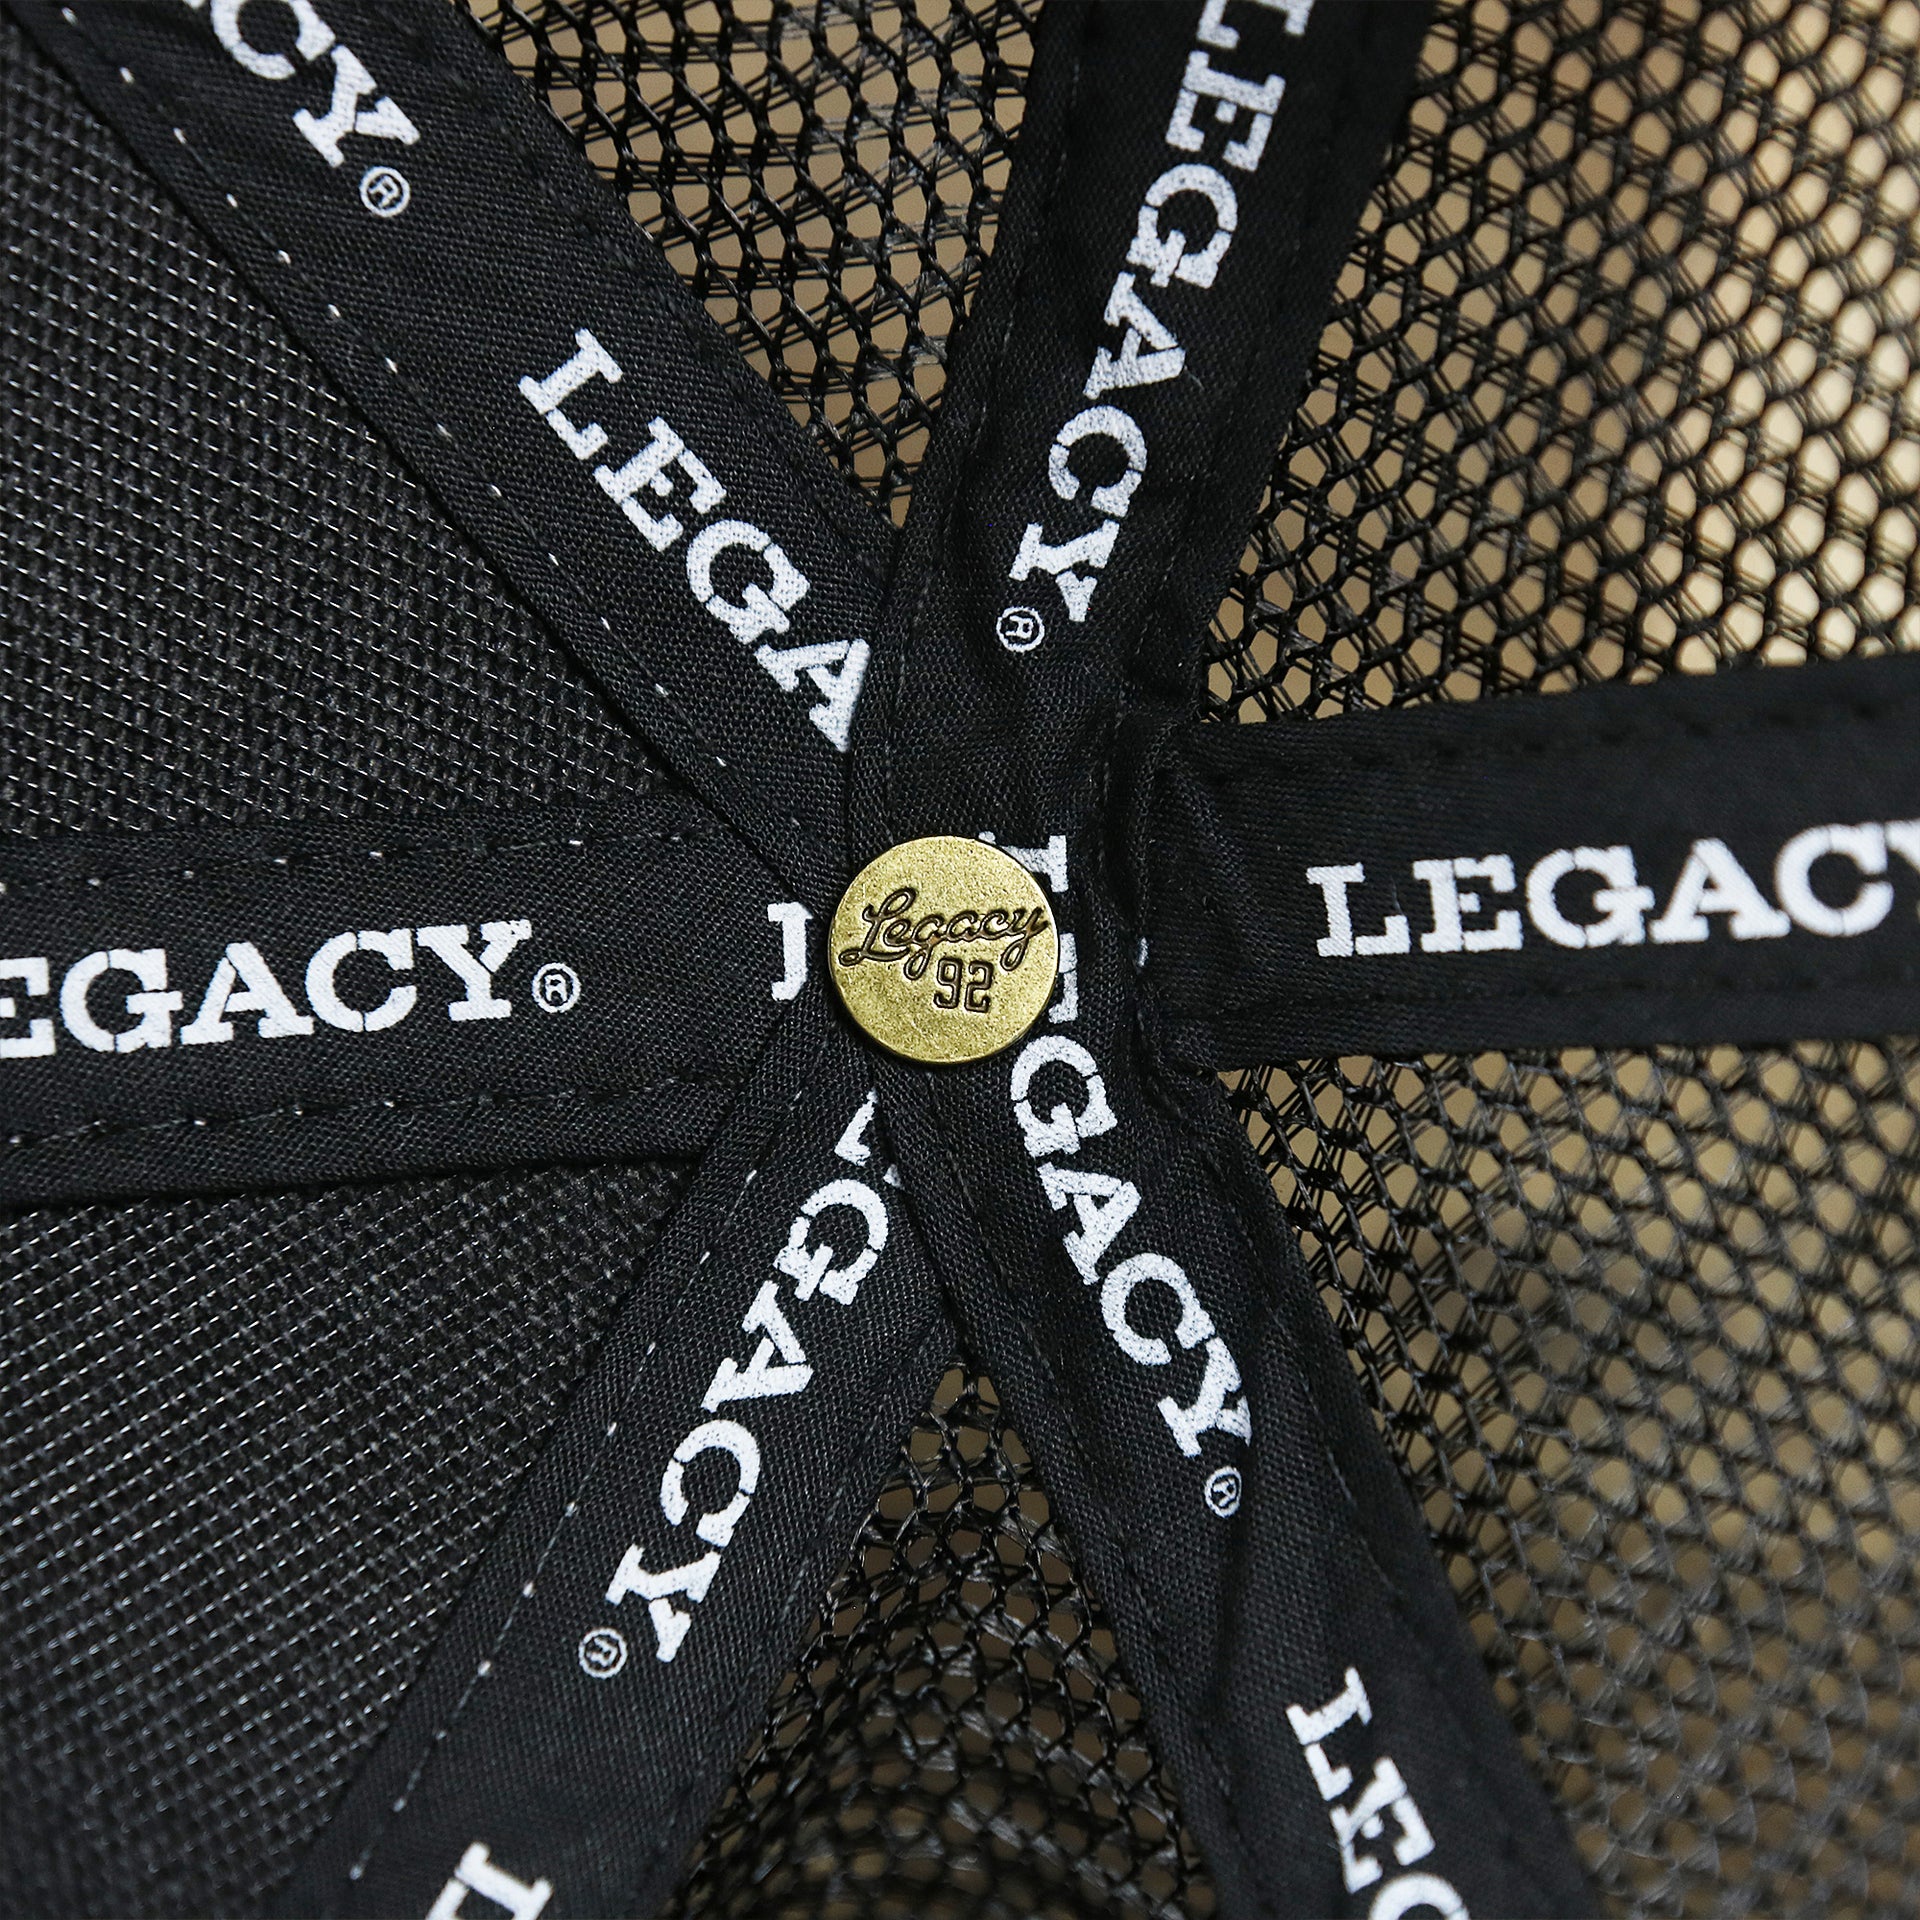 The Legacy Engraved Button on the Youth New Jersey Ocean City Sunset Mesh Back Trucker Hat | Gray And Black Mesh Youth Trucker Hat